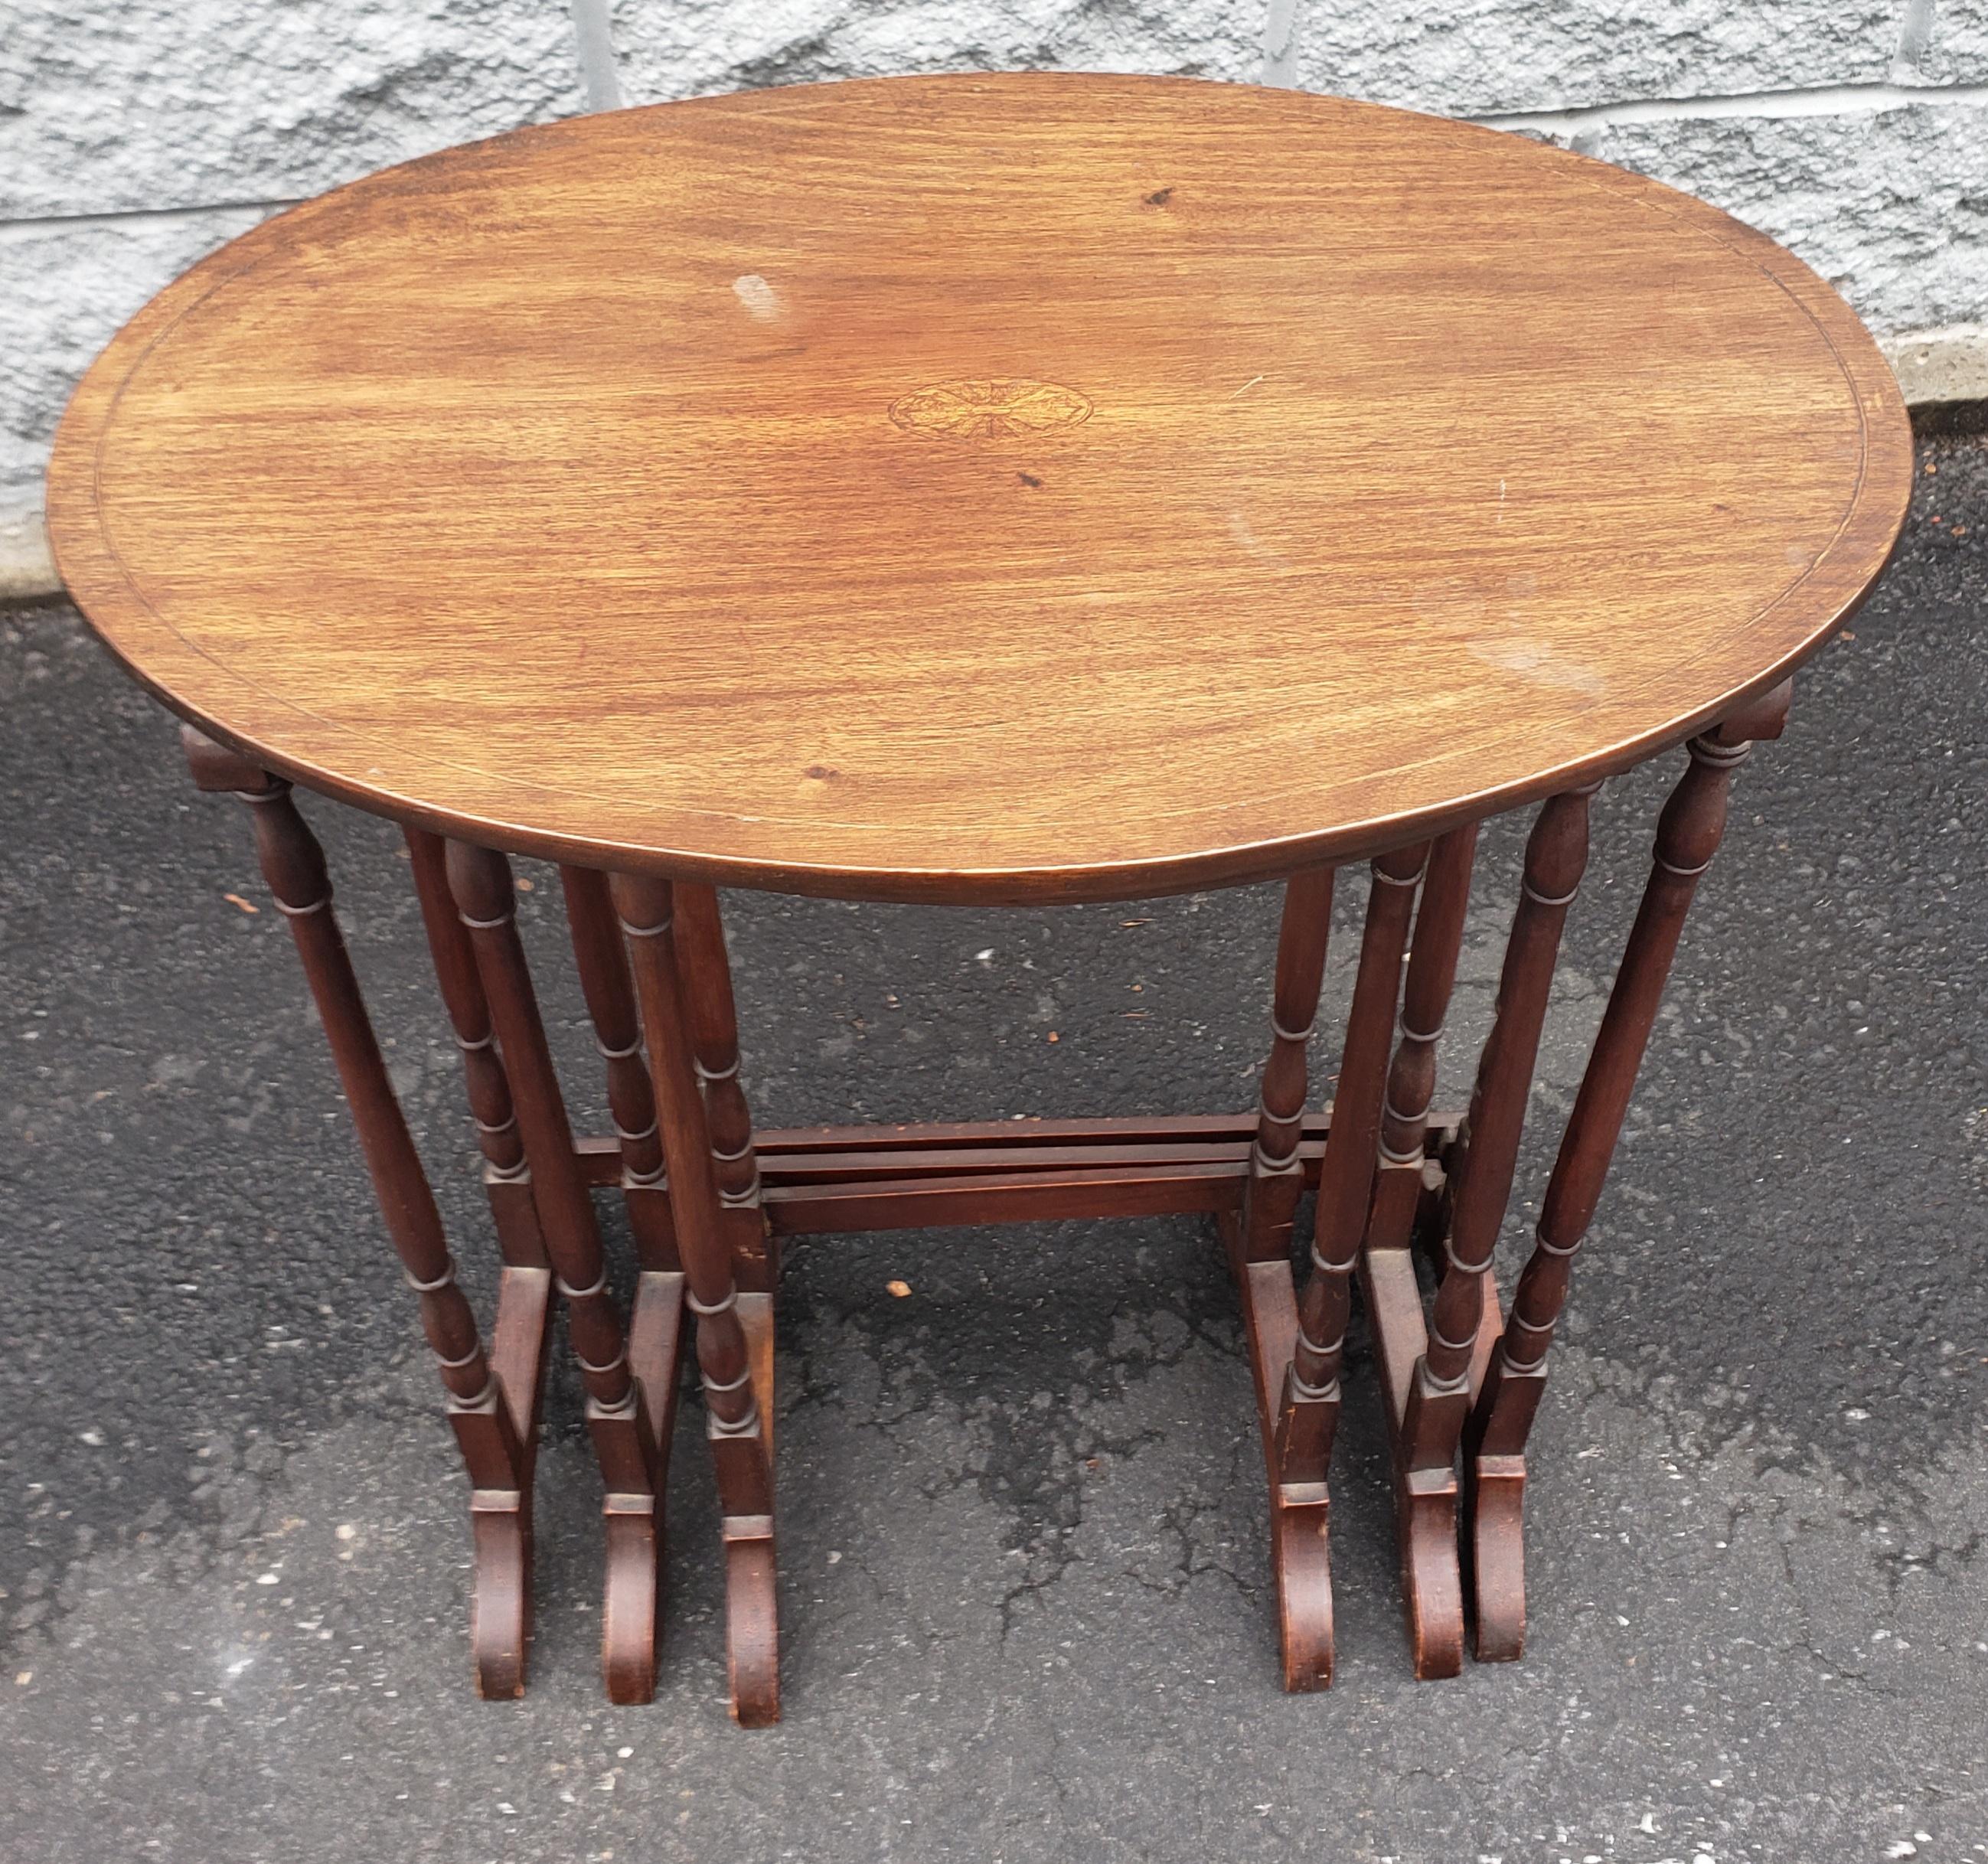 A trio of mid-century Inlaid Mahogany Faux Bamboo Nesting Tables.
The measures measures:
Larger table is 22.5